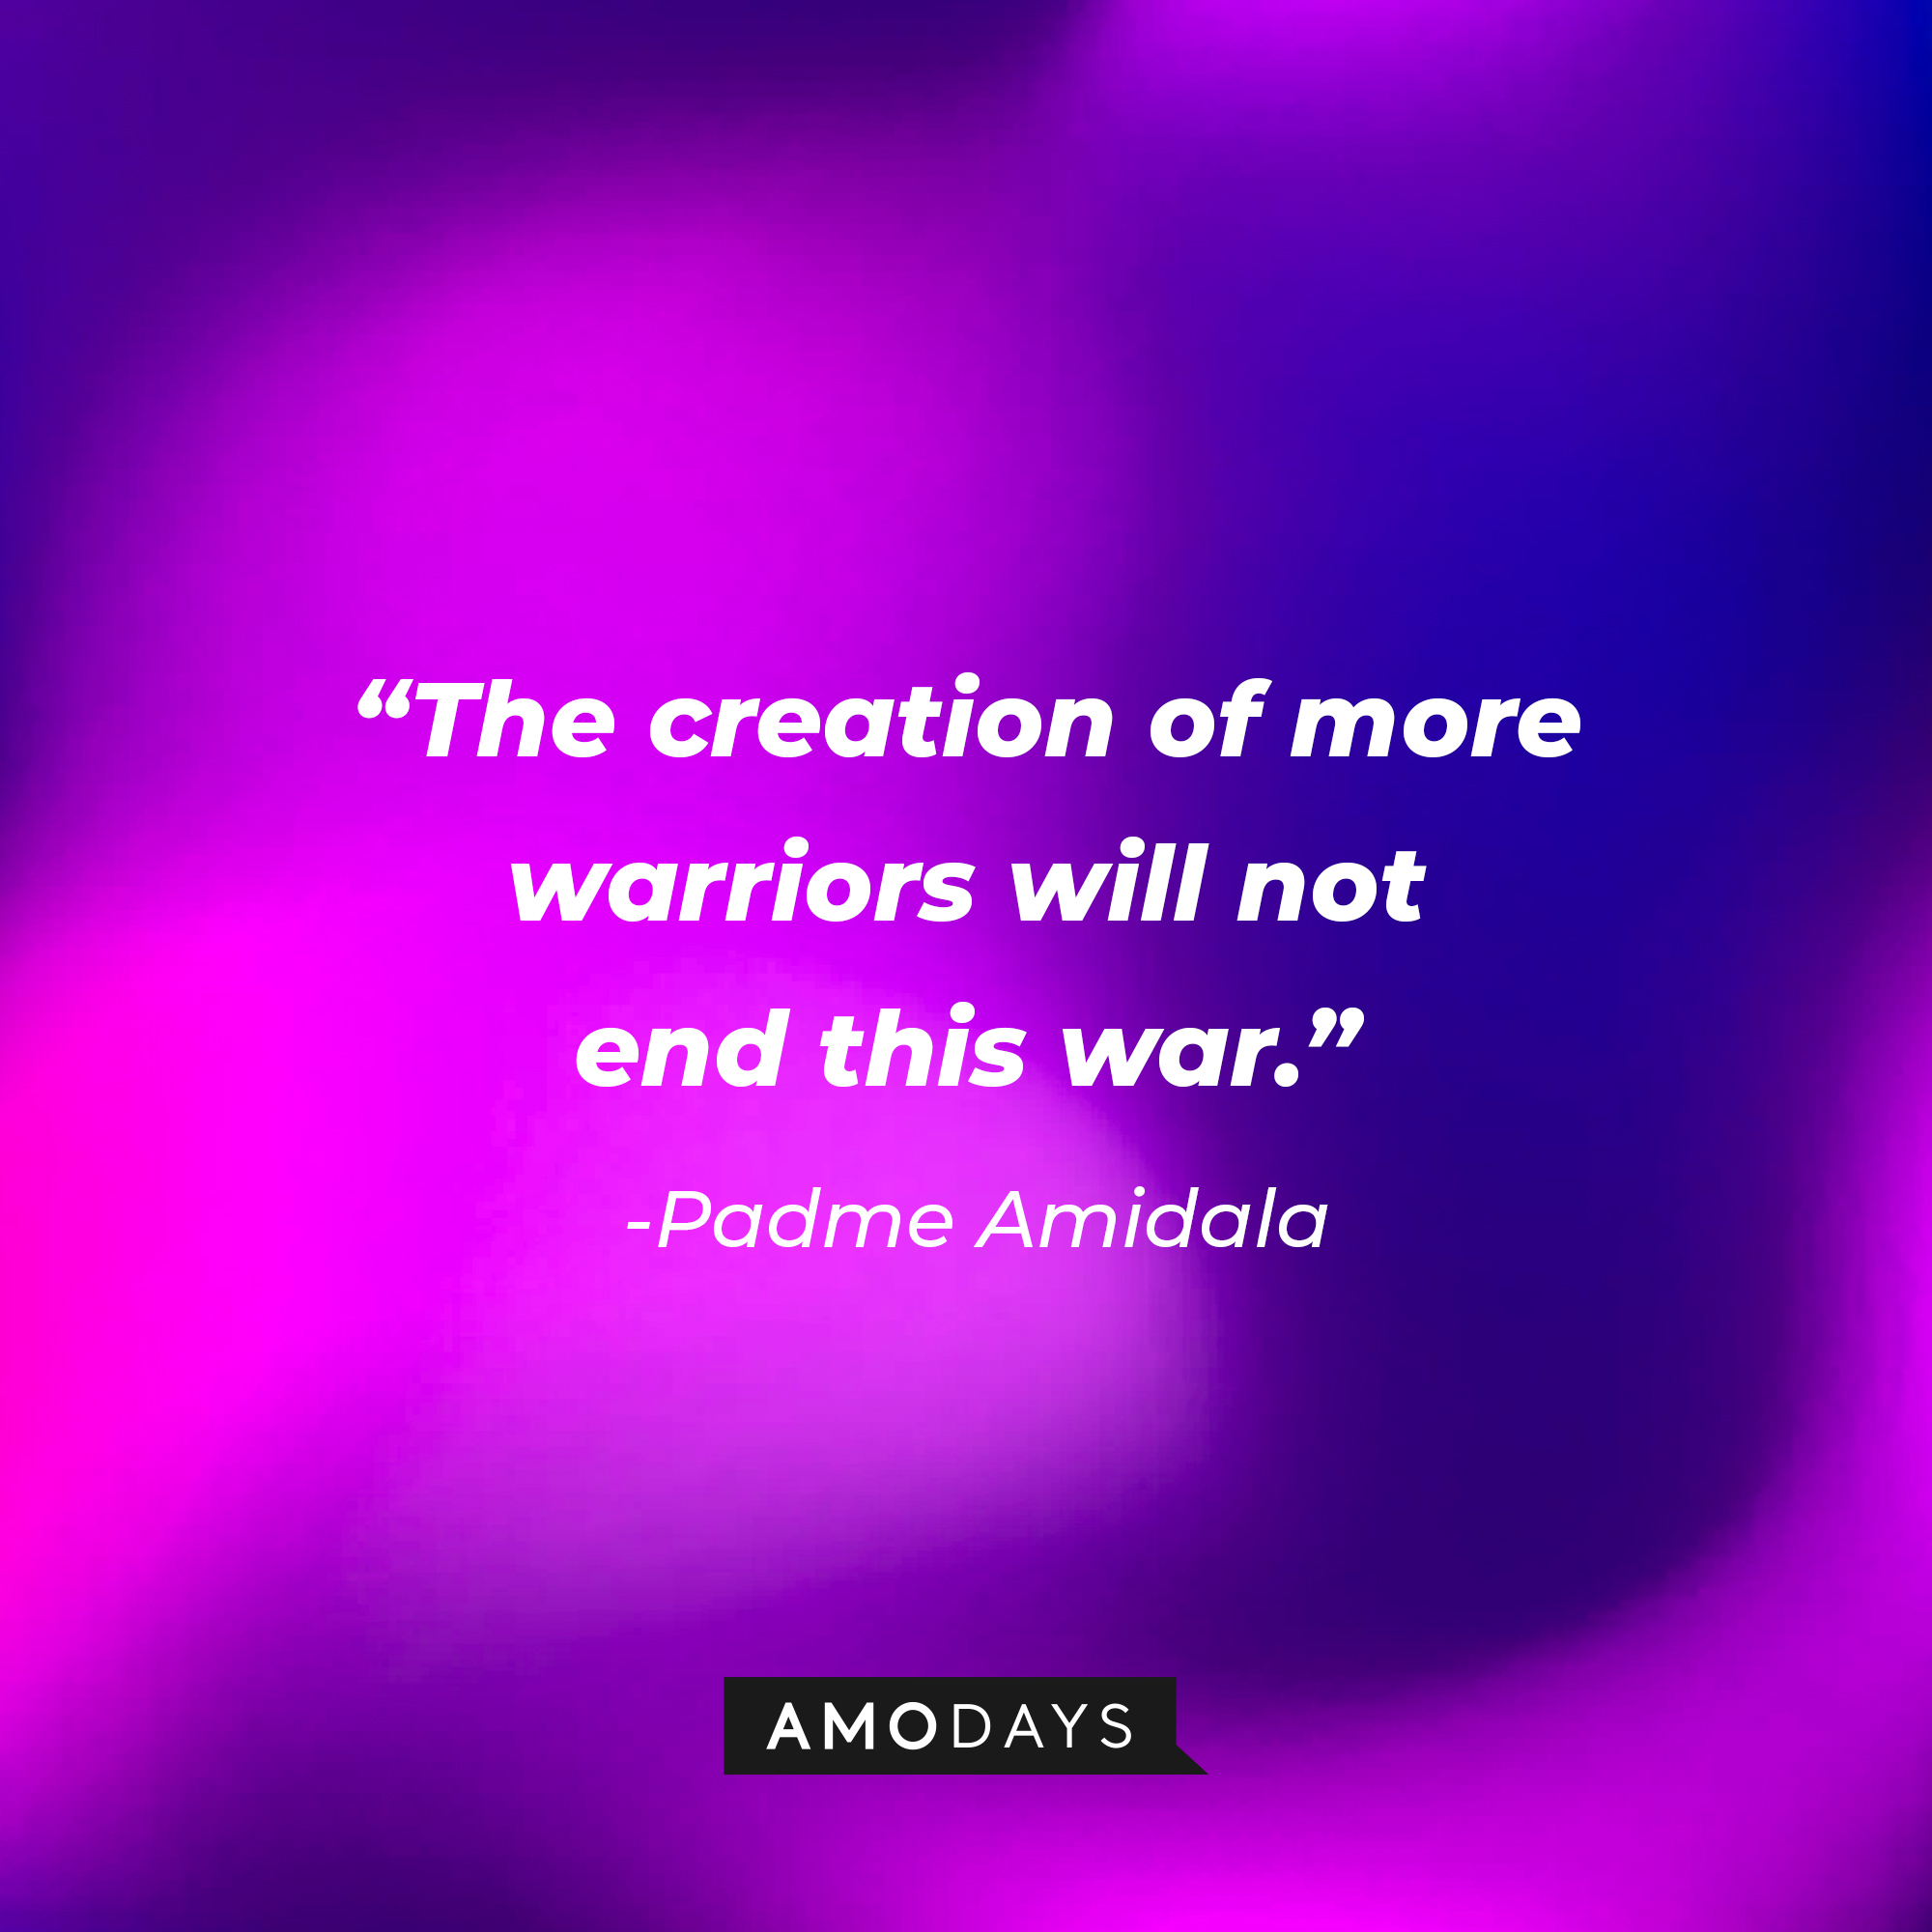 Padme Amidala's quote: "The creation of more warriors will not end this war." | Source: AmoDays